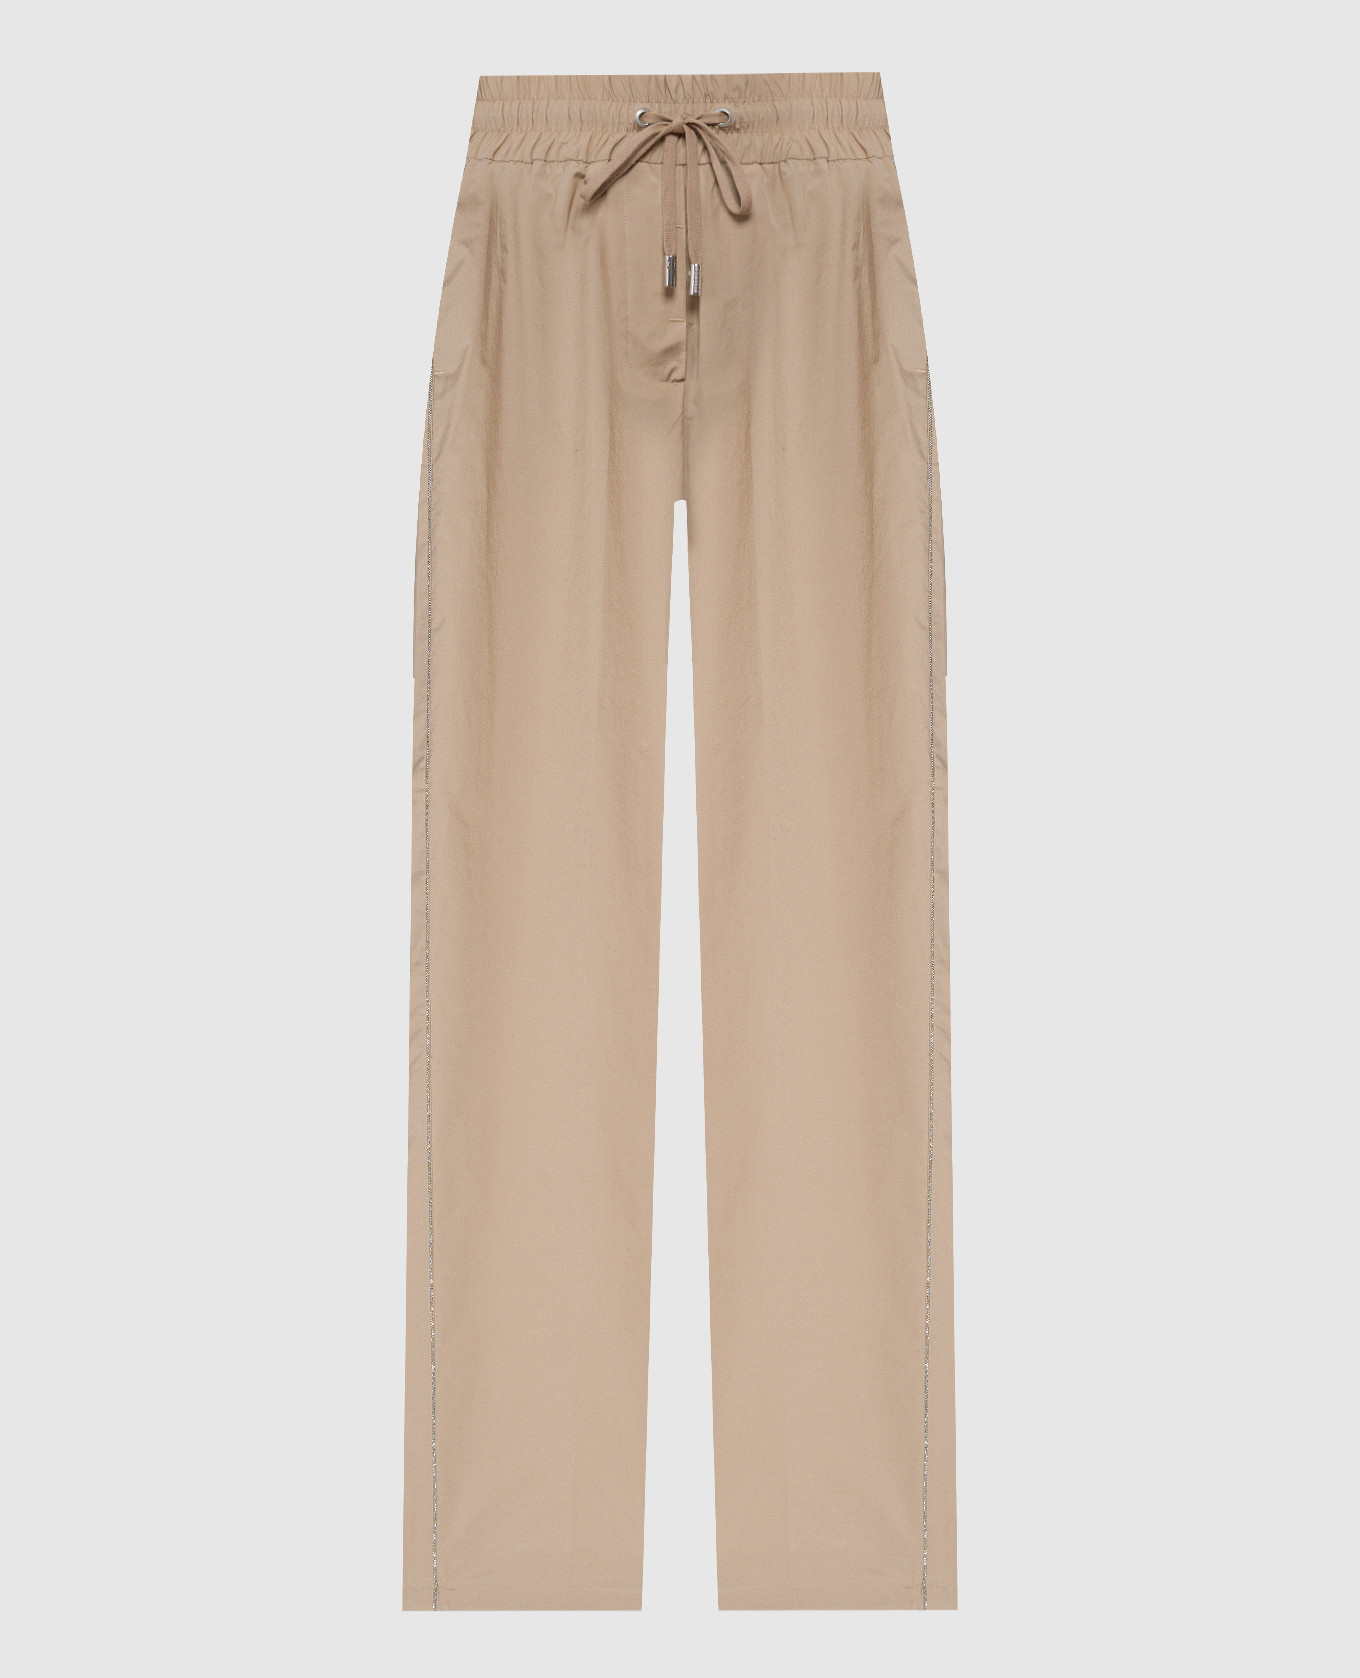 Brown pants with monil chain